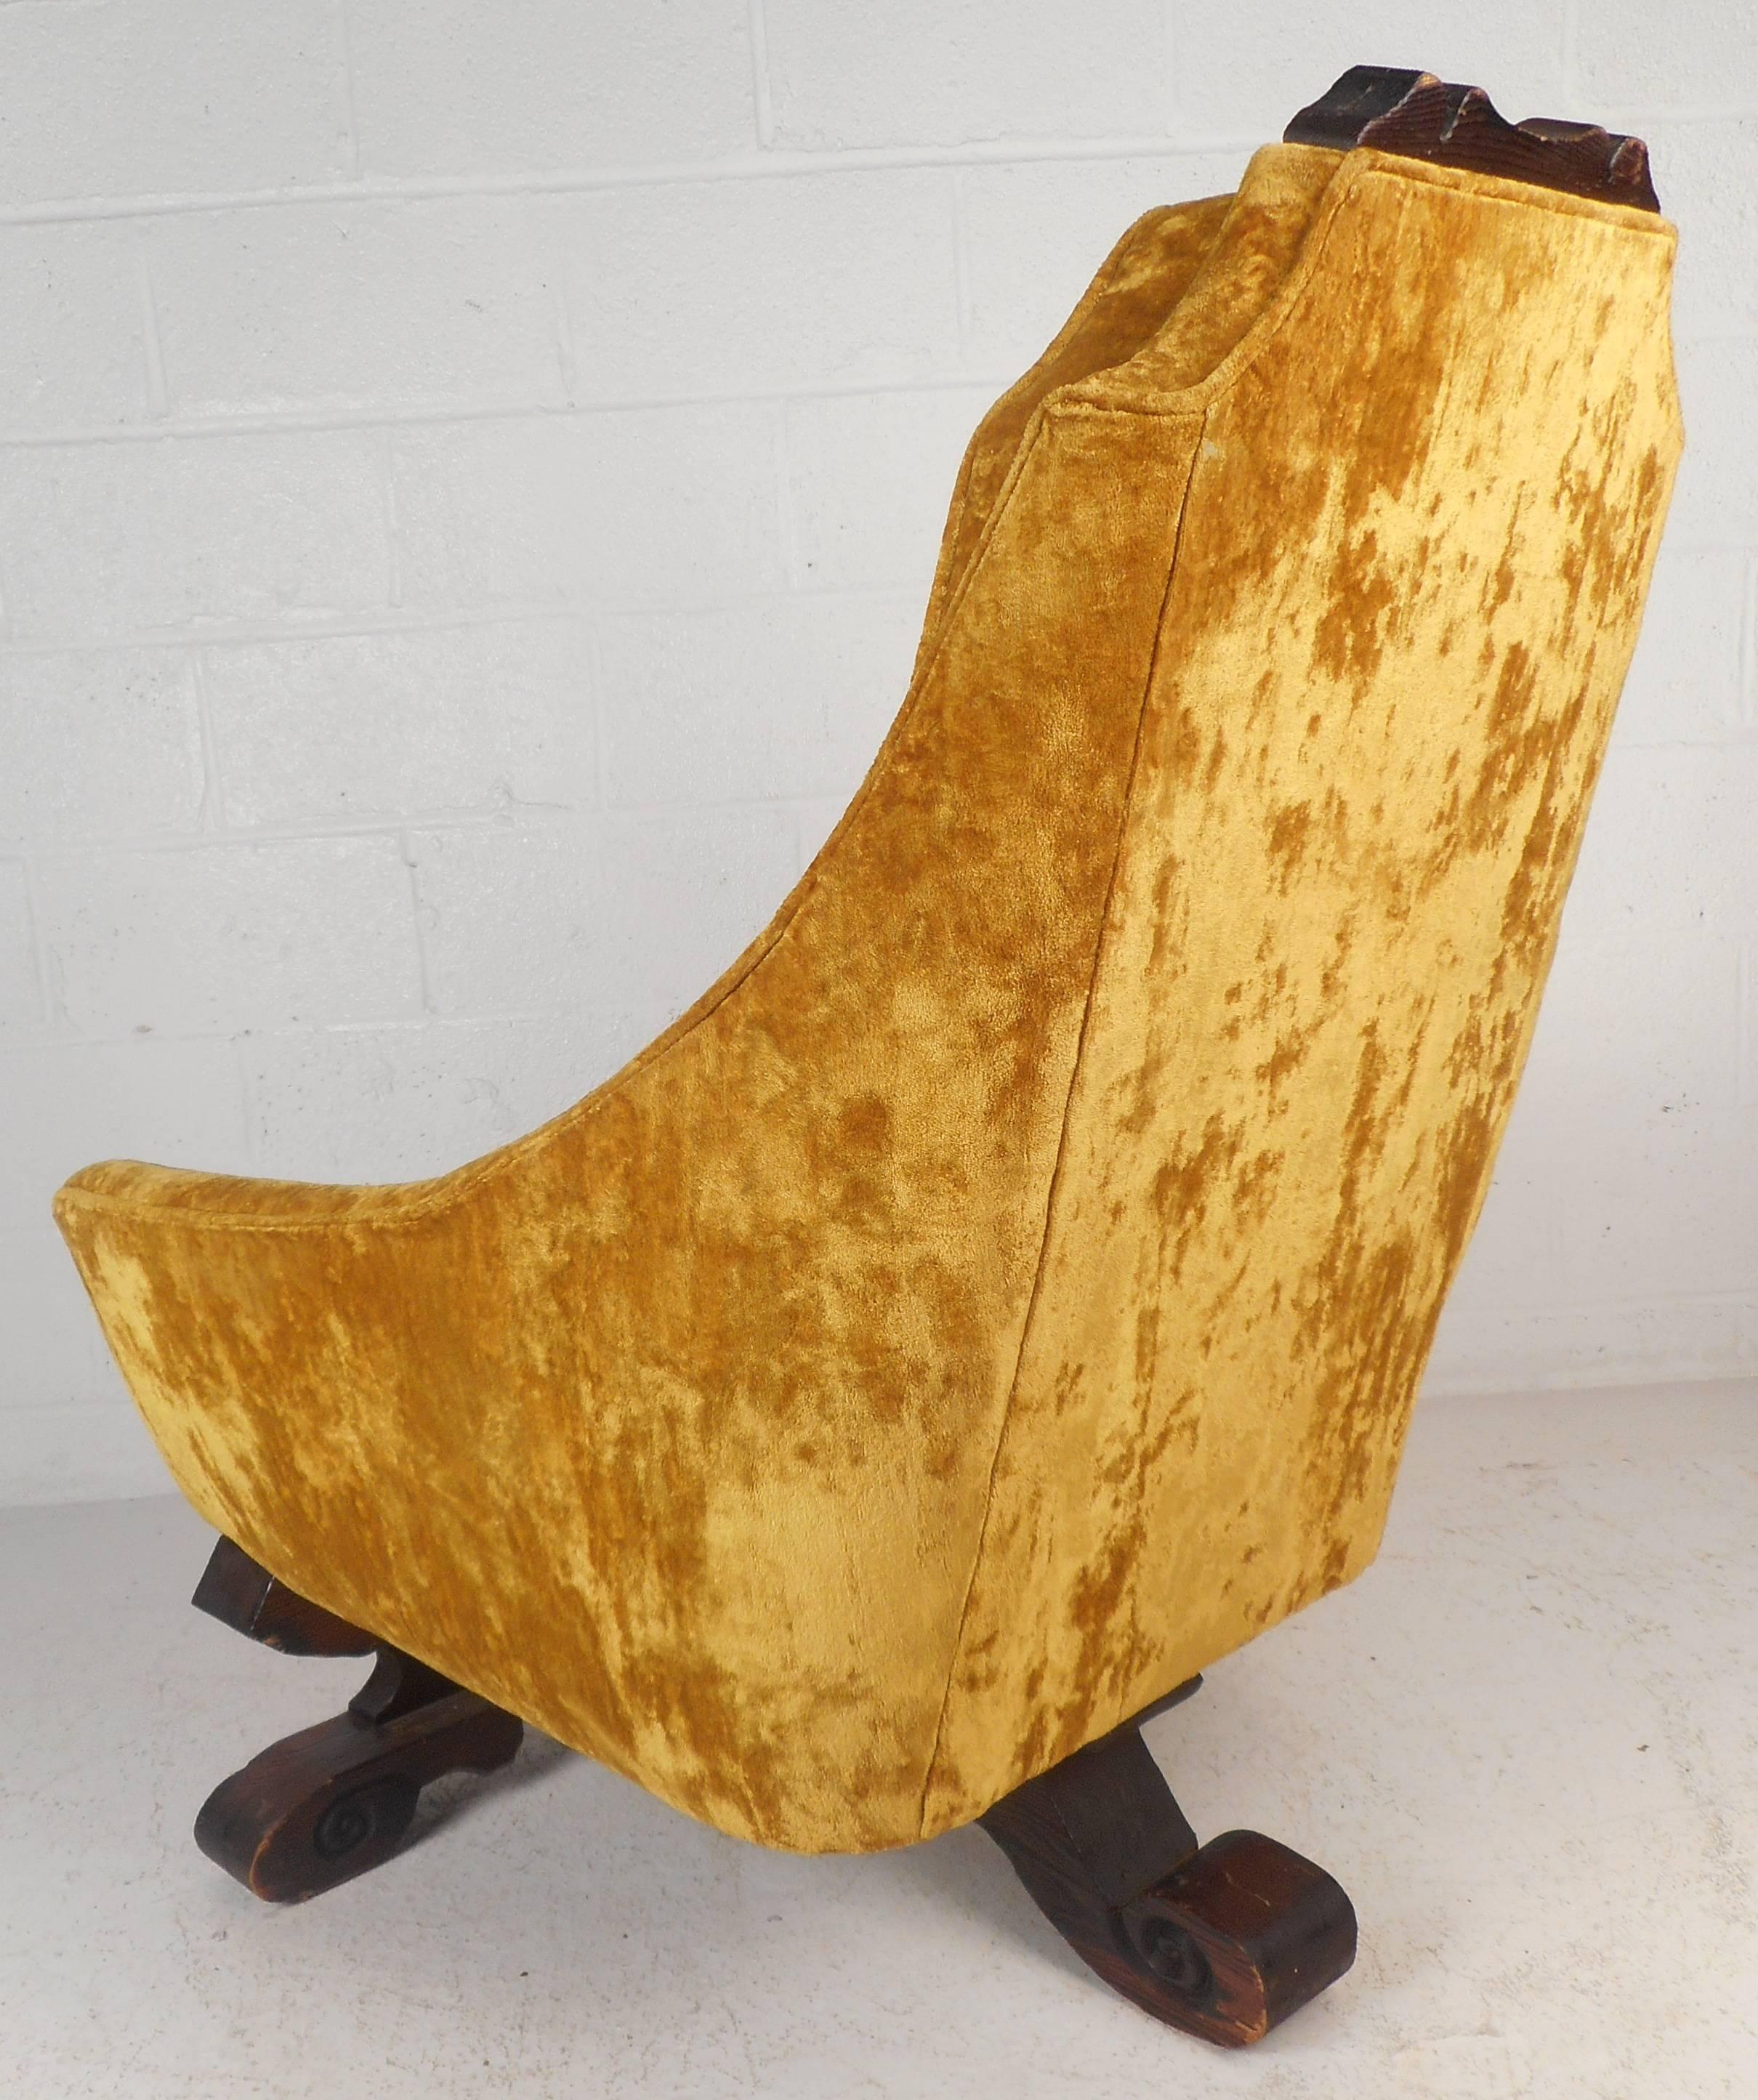 Impressive vintage modern lounge chair by Witco features a beautifully carved teakwood base with three legs and a carved top. The wide seat and high backrest are covered in plush yellow velvet upholstery. The detailed wood work and comfortable